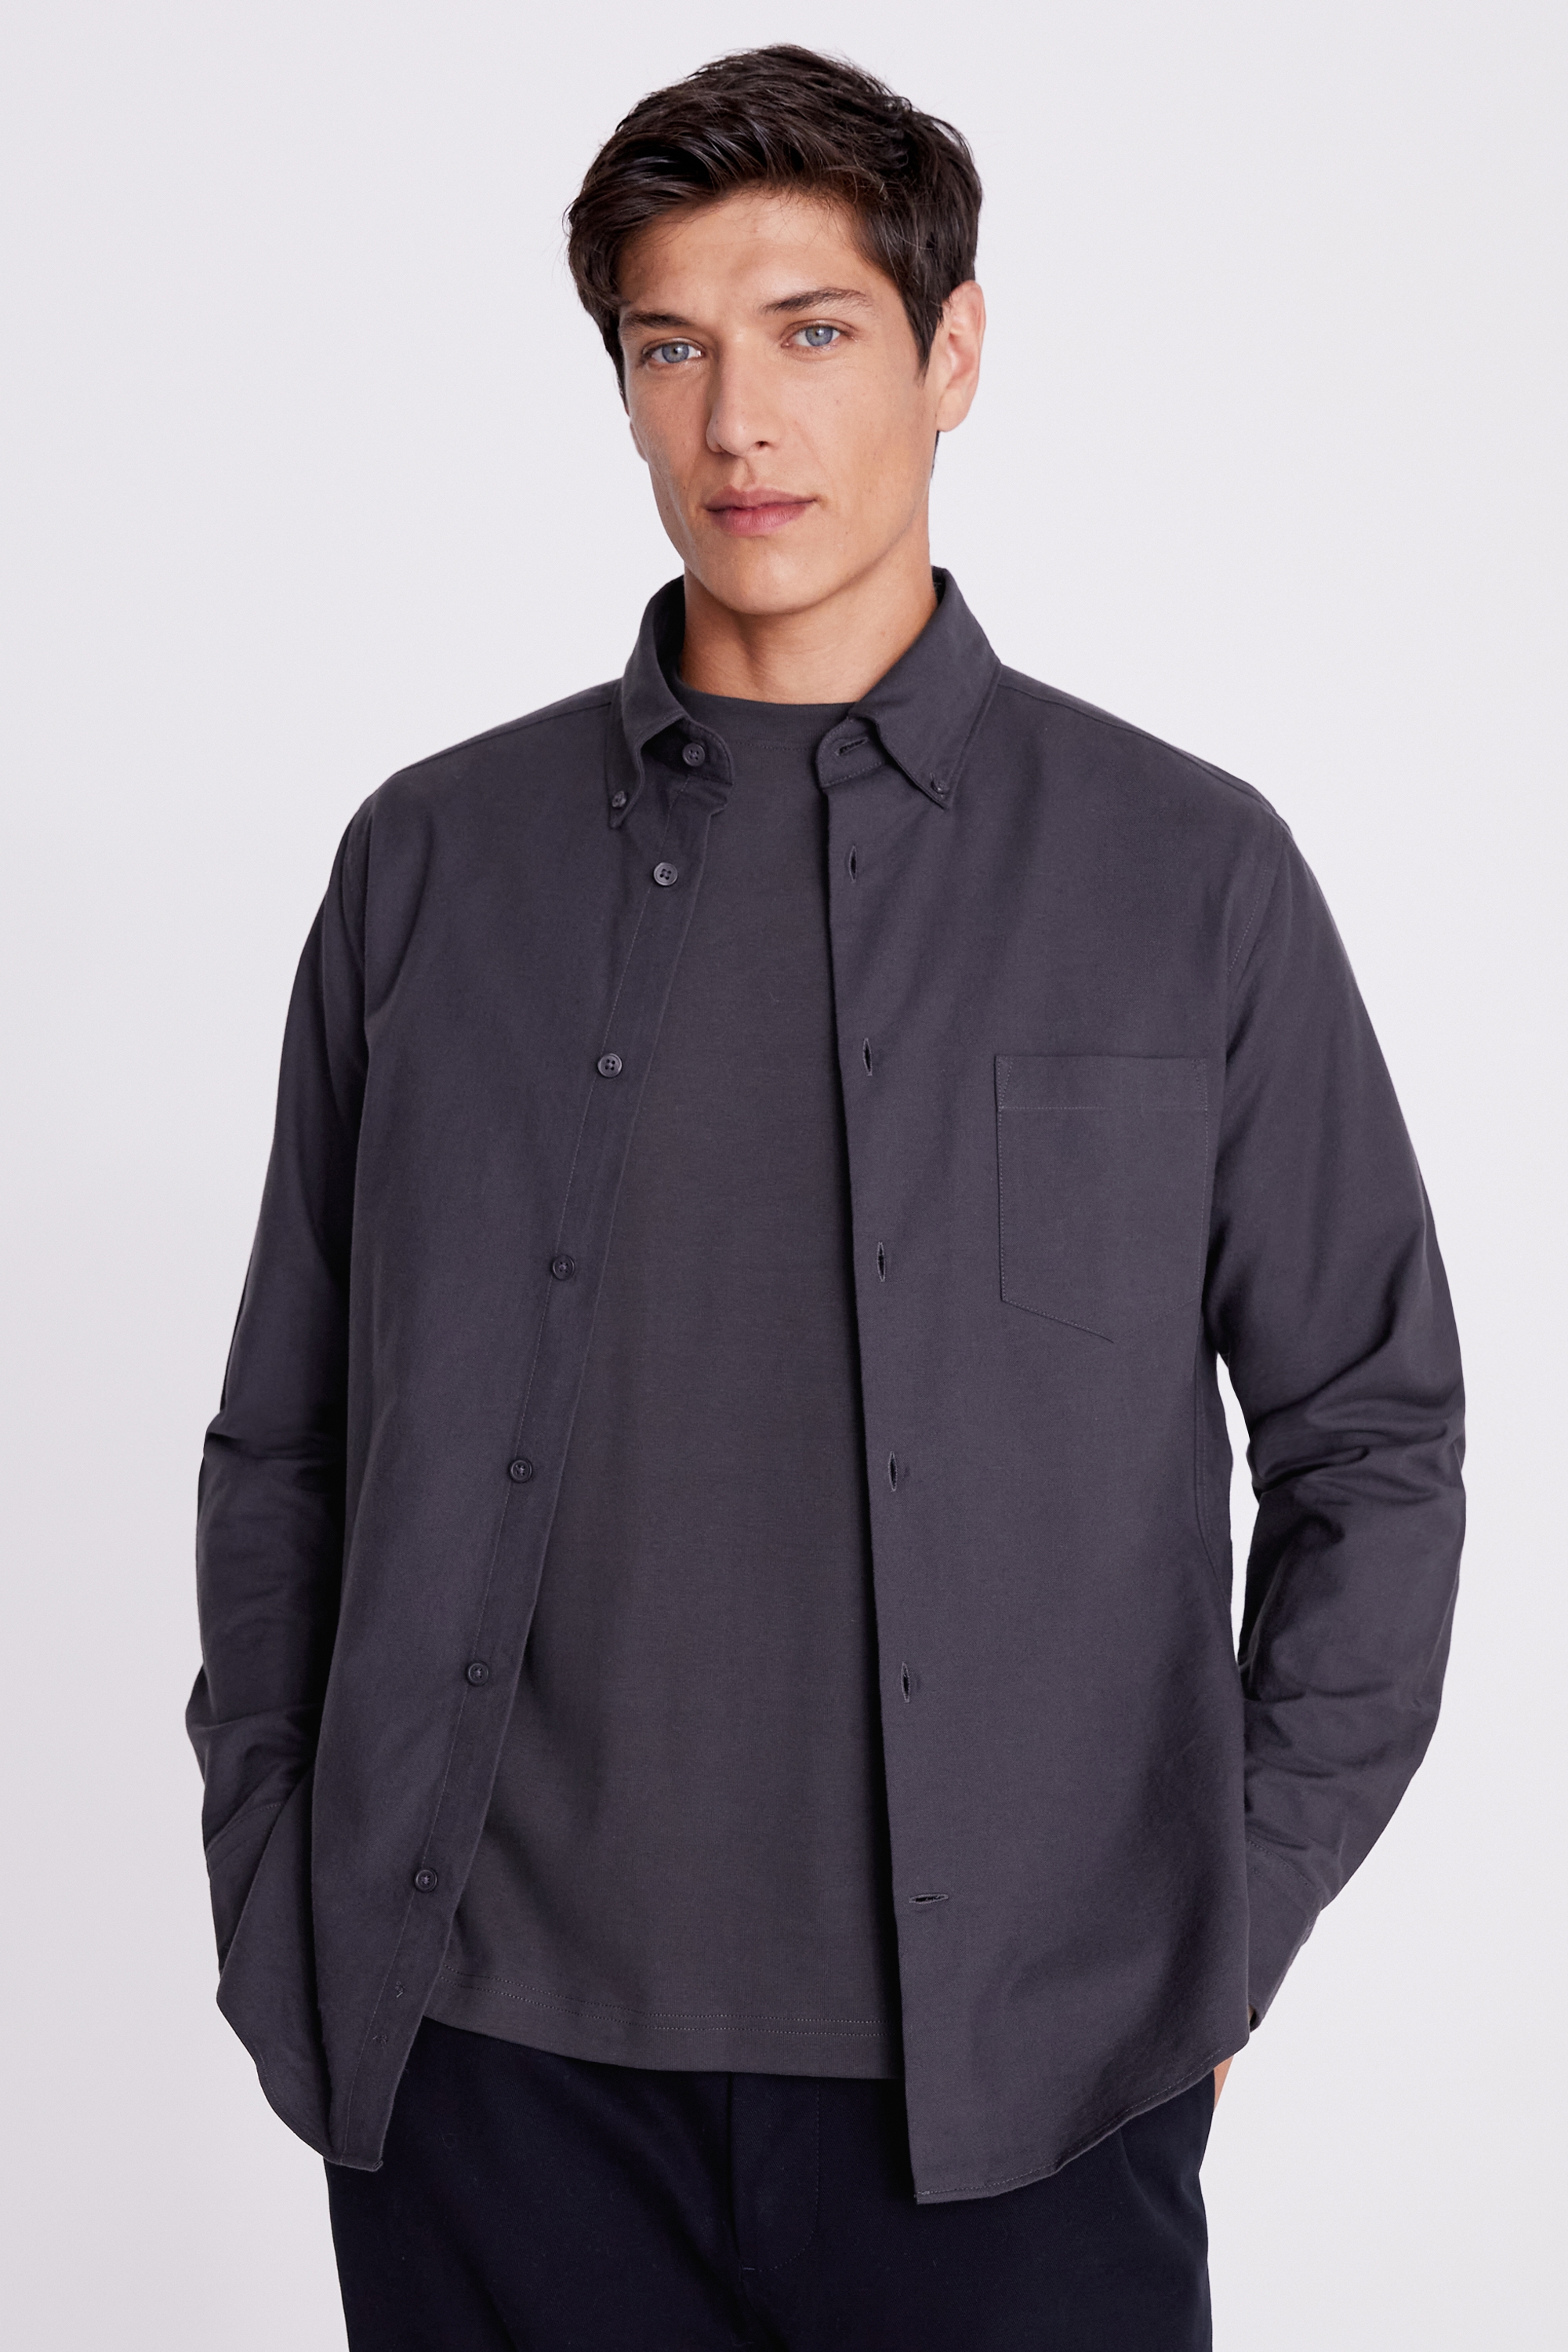 Charcoal Washed Oxford Shirt | Buy Online at Moss